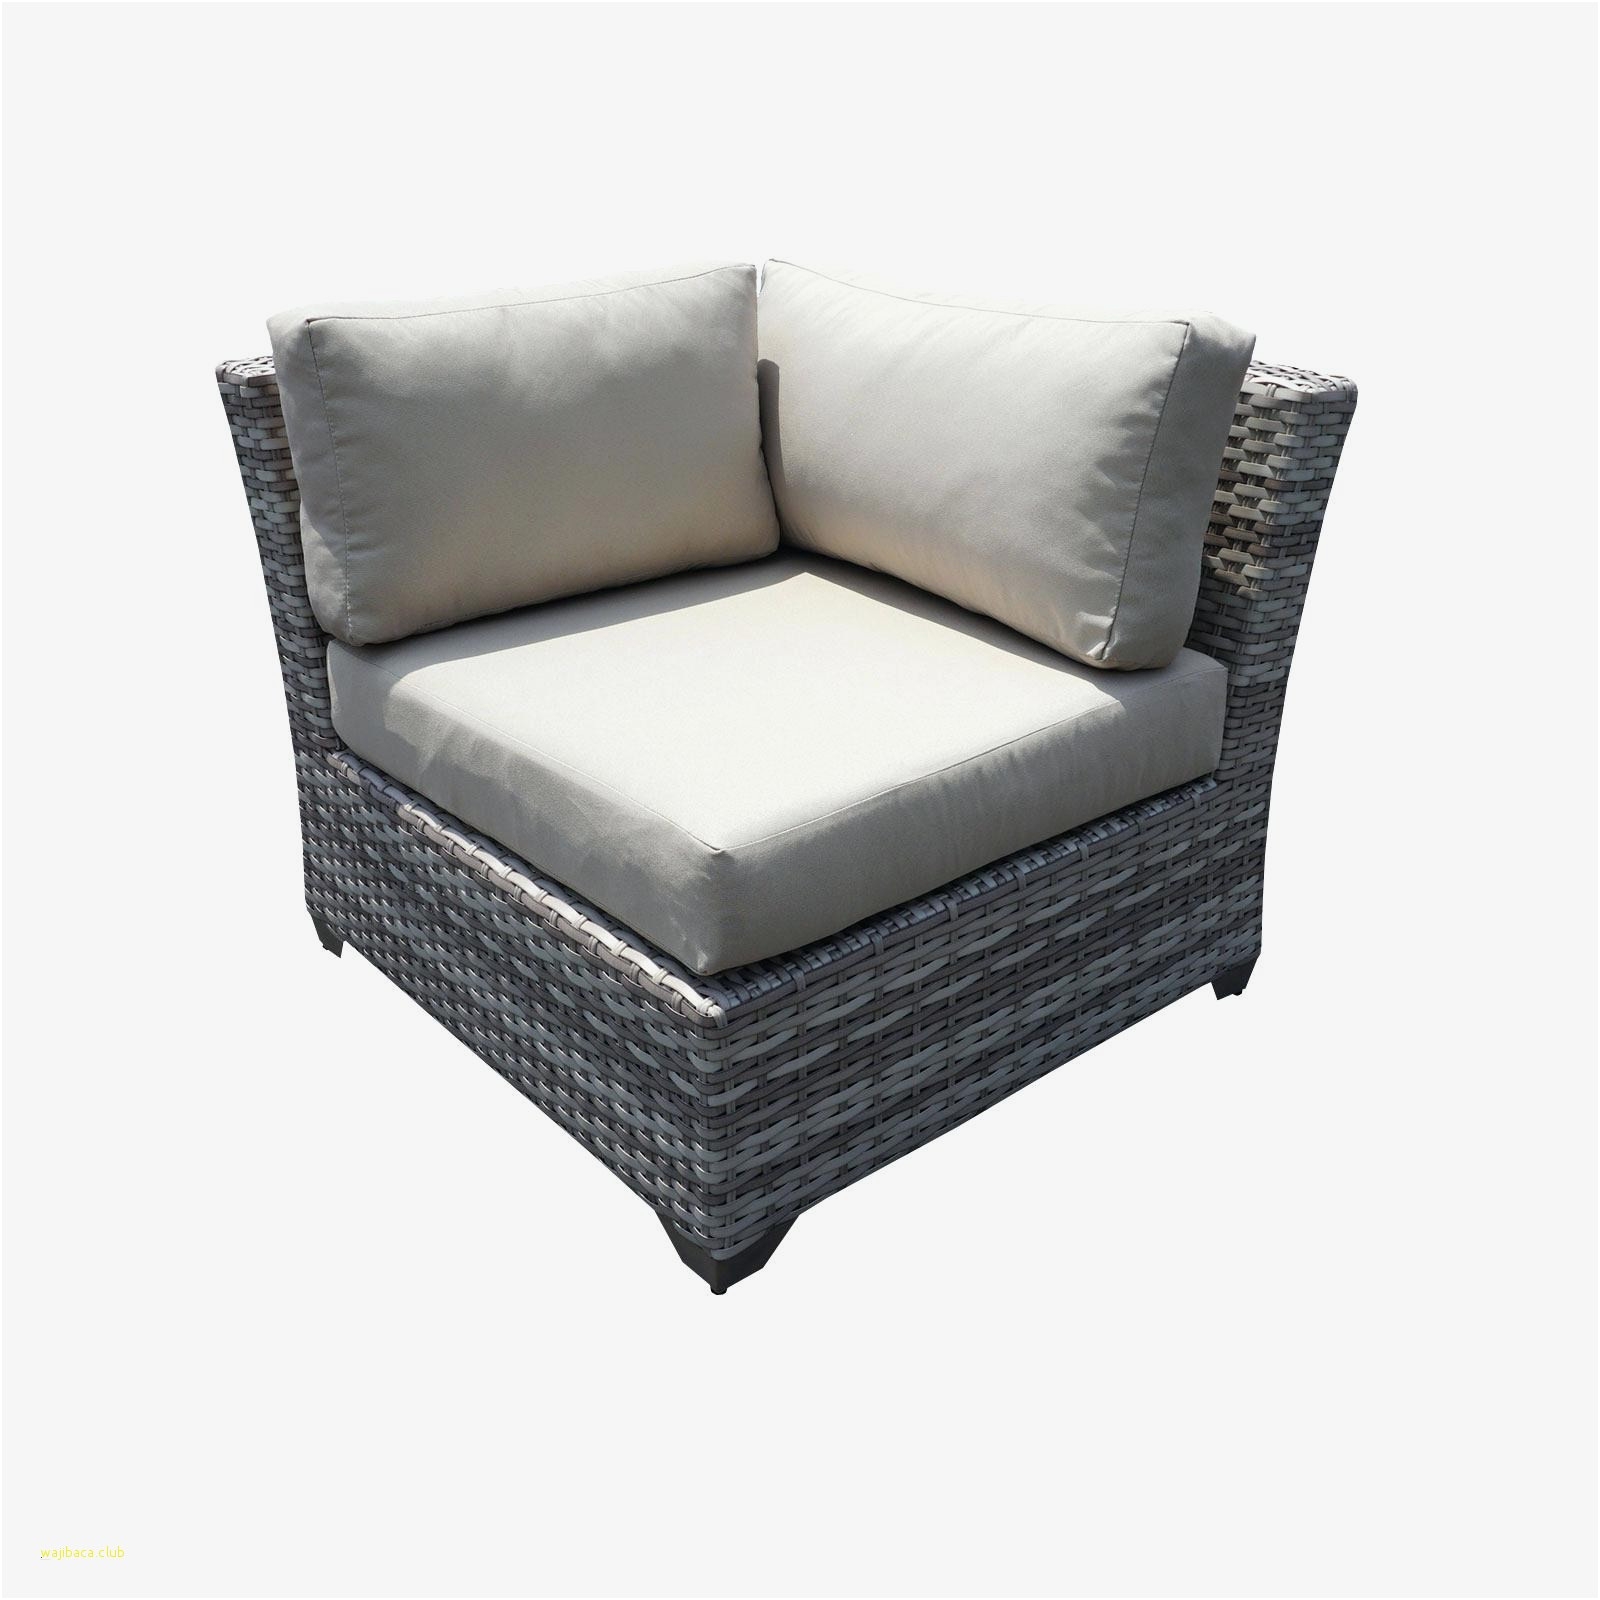 wicker outdoor sofa 0d patio chairs sale replacement cushions